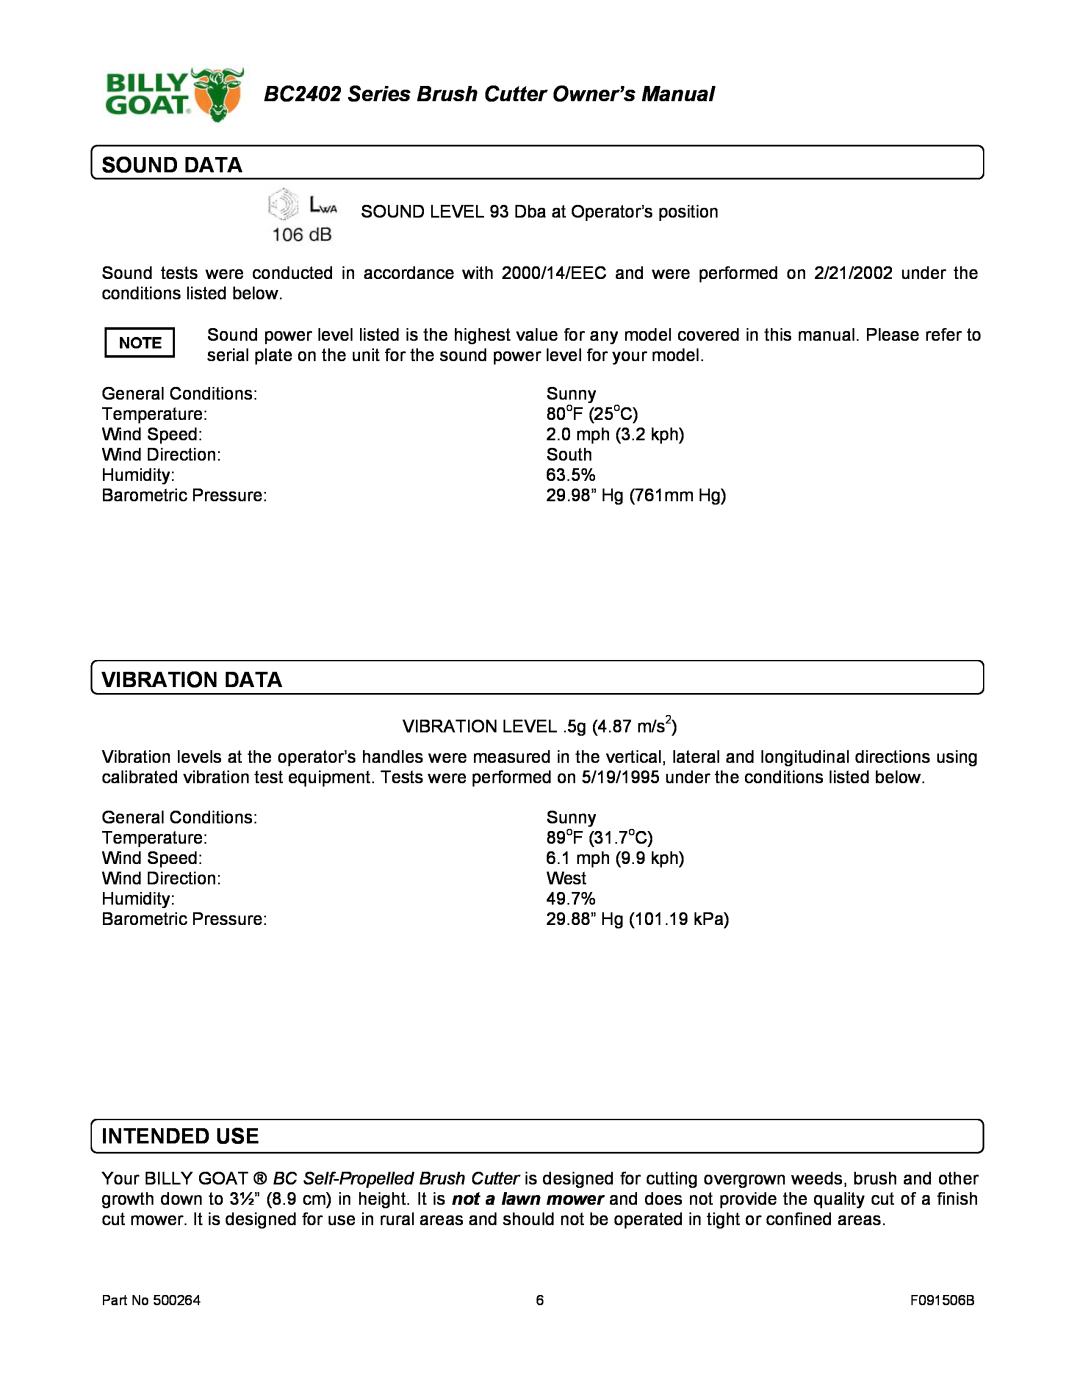 Billy Goat BC2402 owner manual Sound Data, Vibration Data, Intended Use 